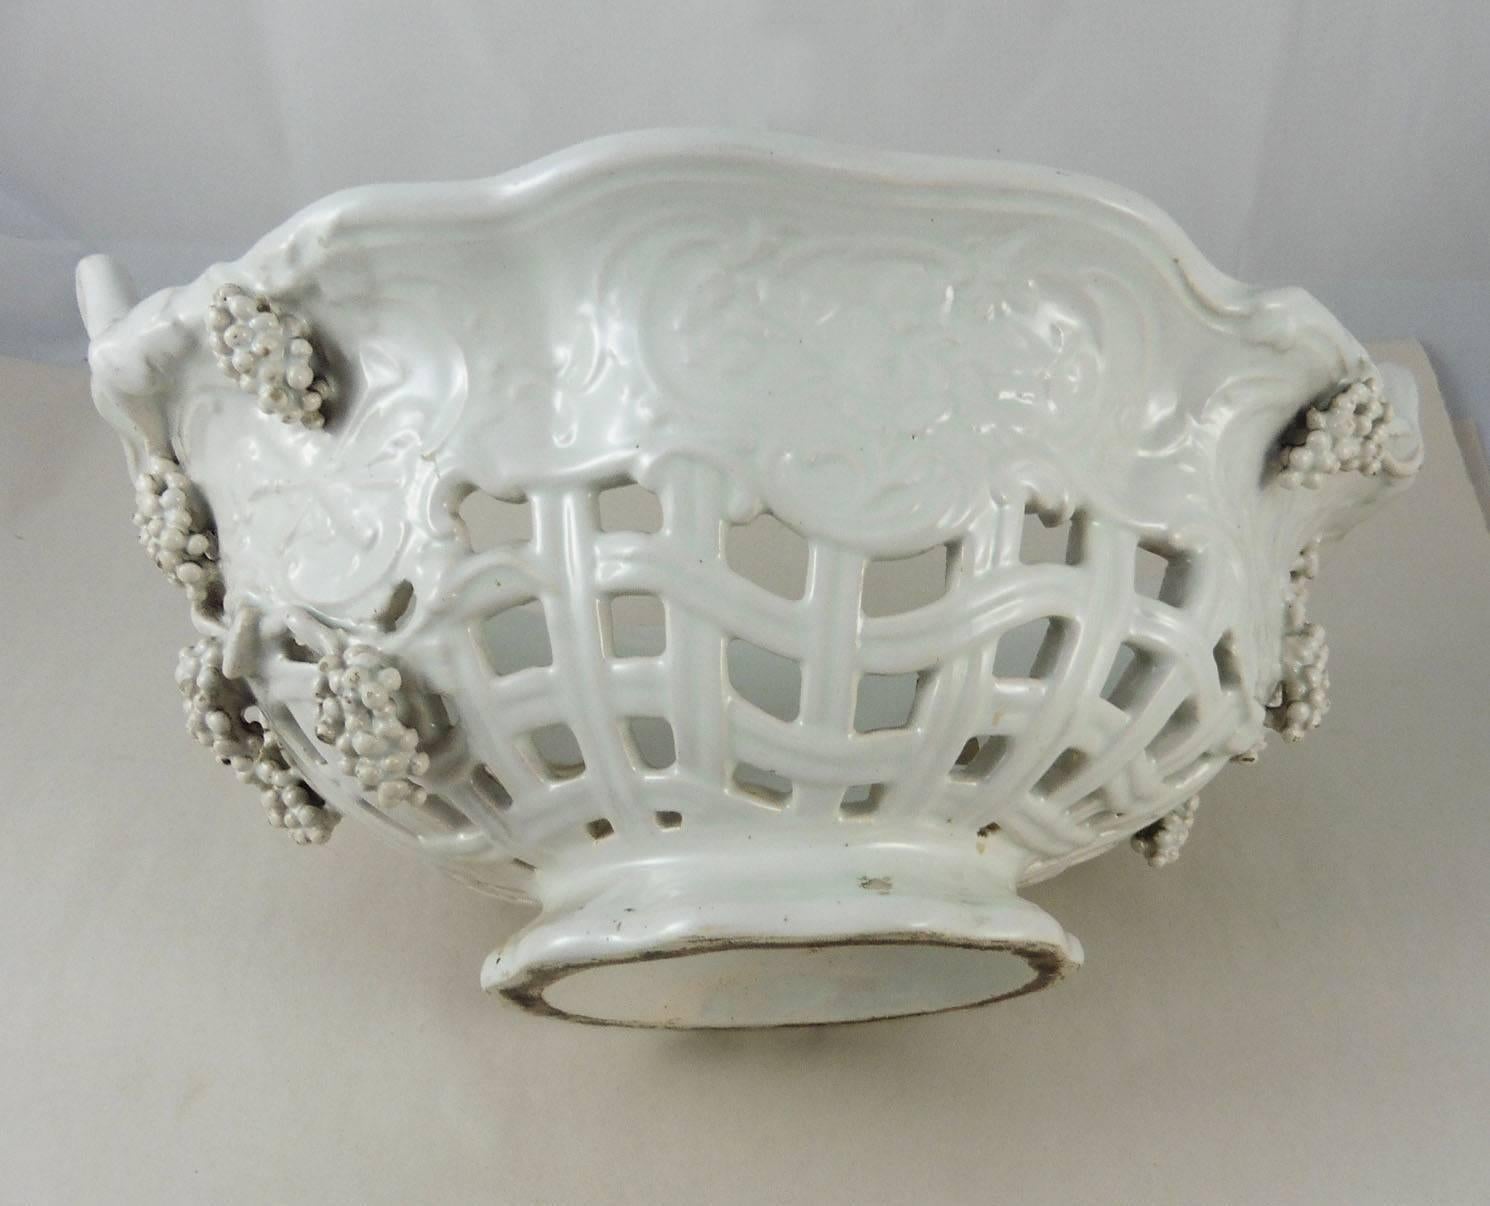 French white faience grapes-motif reticulated handled basket, circa 1900.